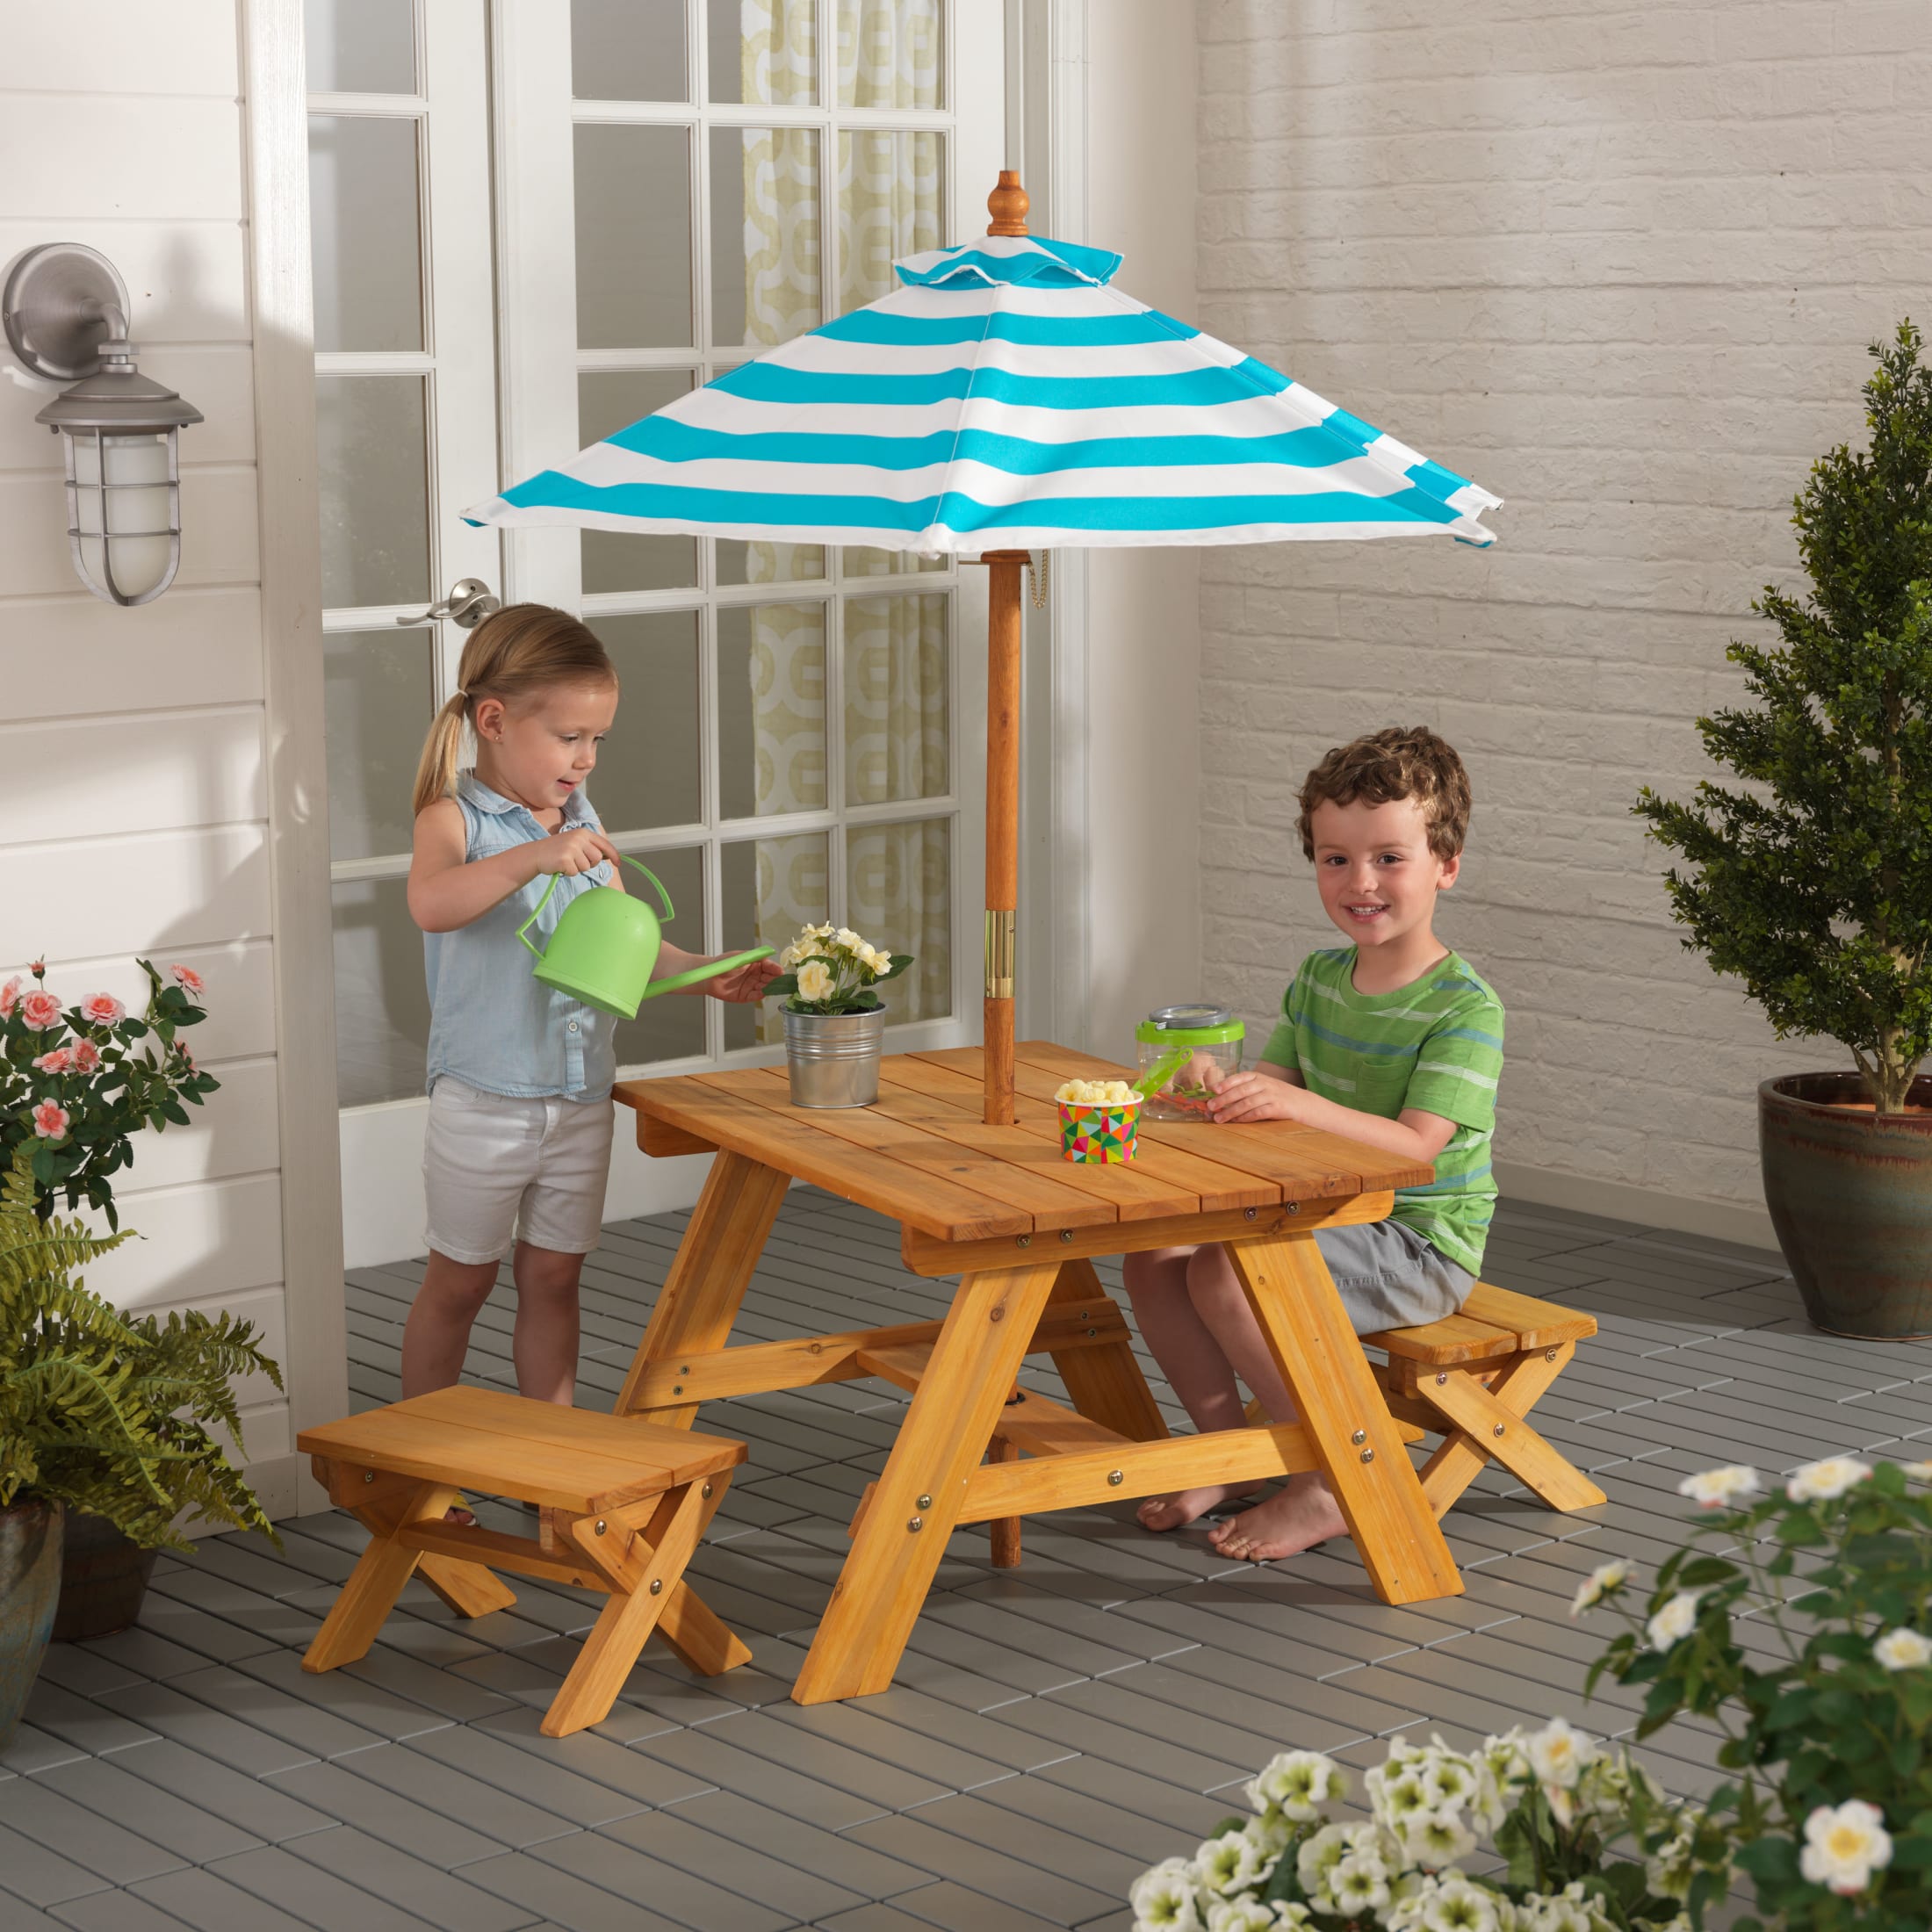 KidKraft Outdoor Wooden Table & Bench Set, Striped Umbrella, Turquoise and White - image 1 of 3